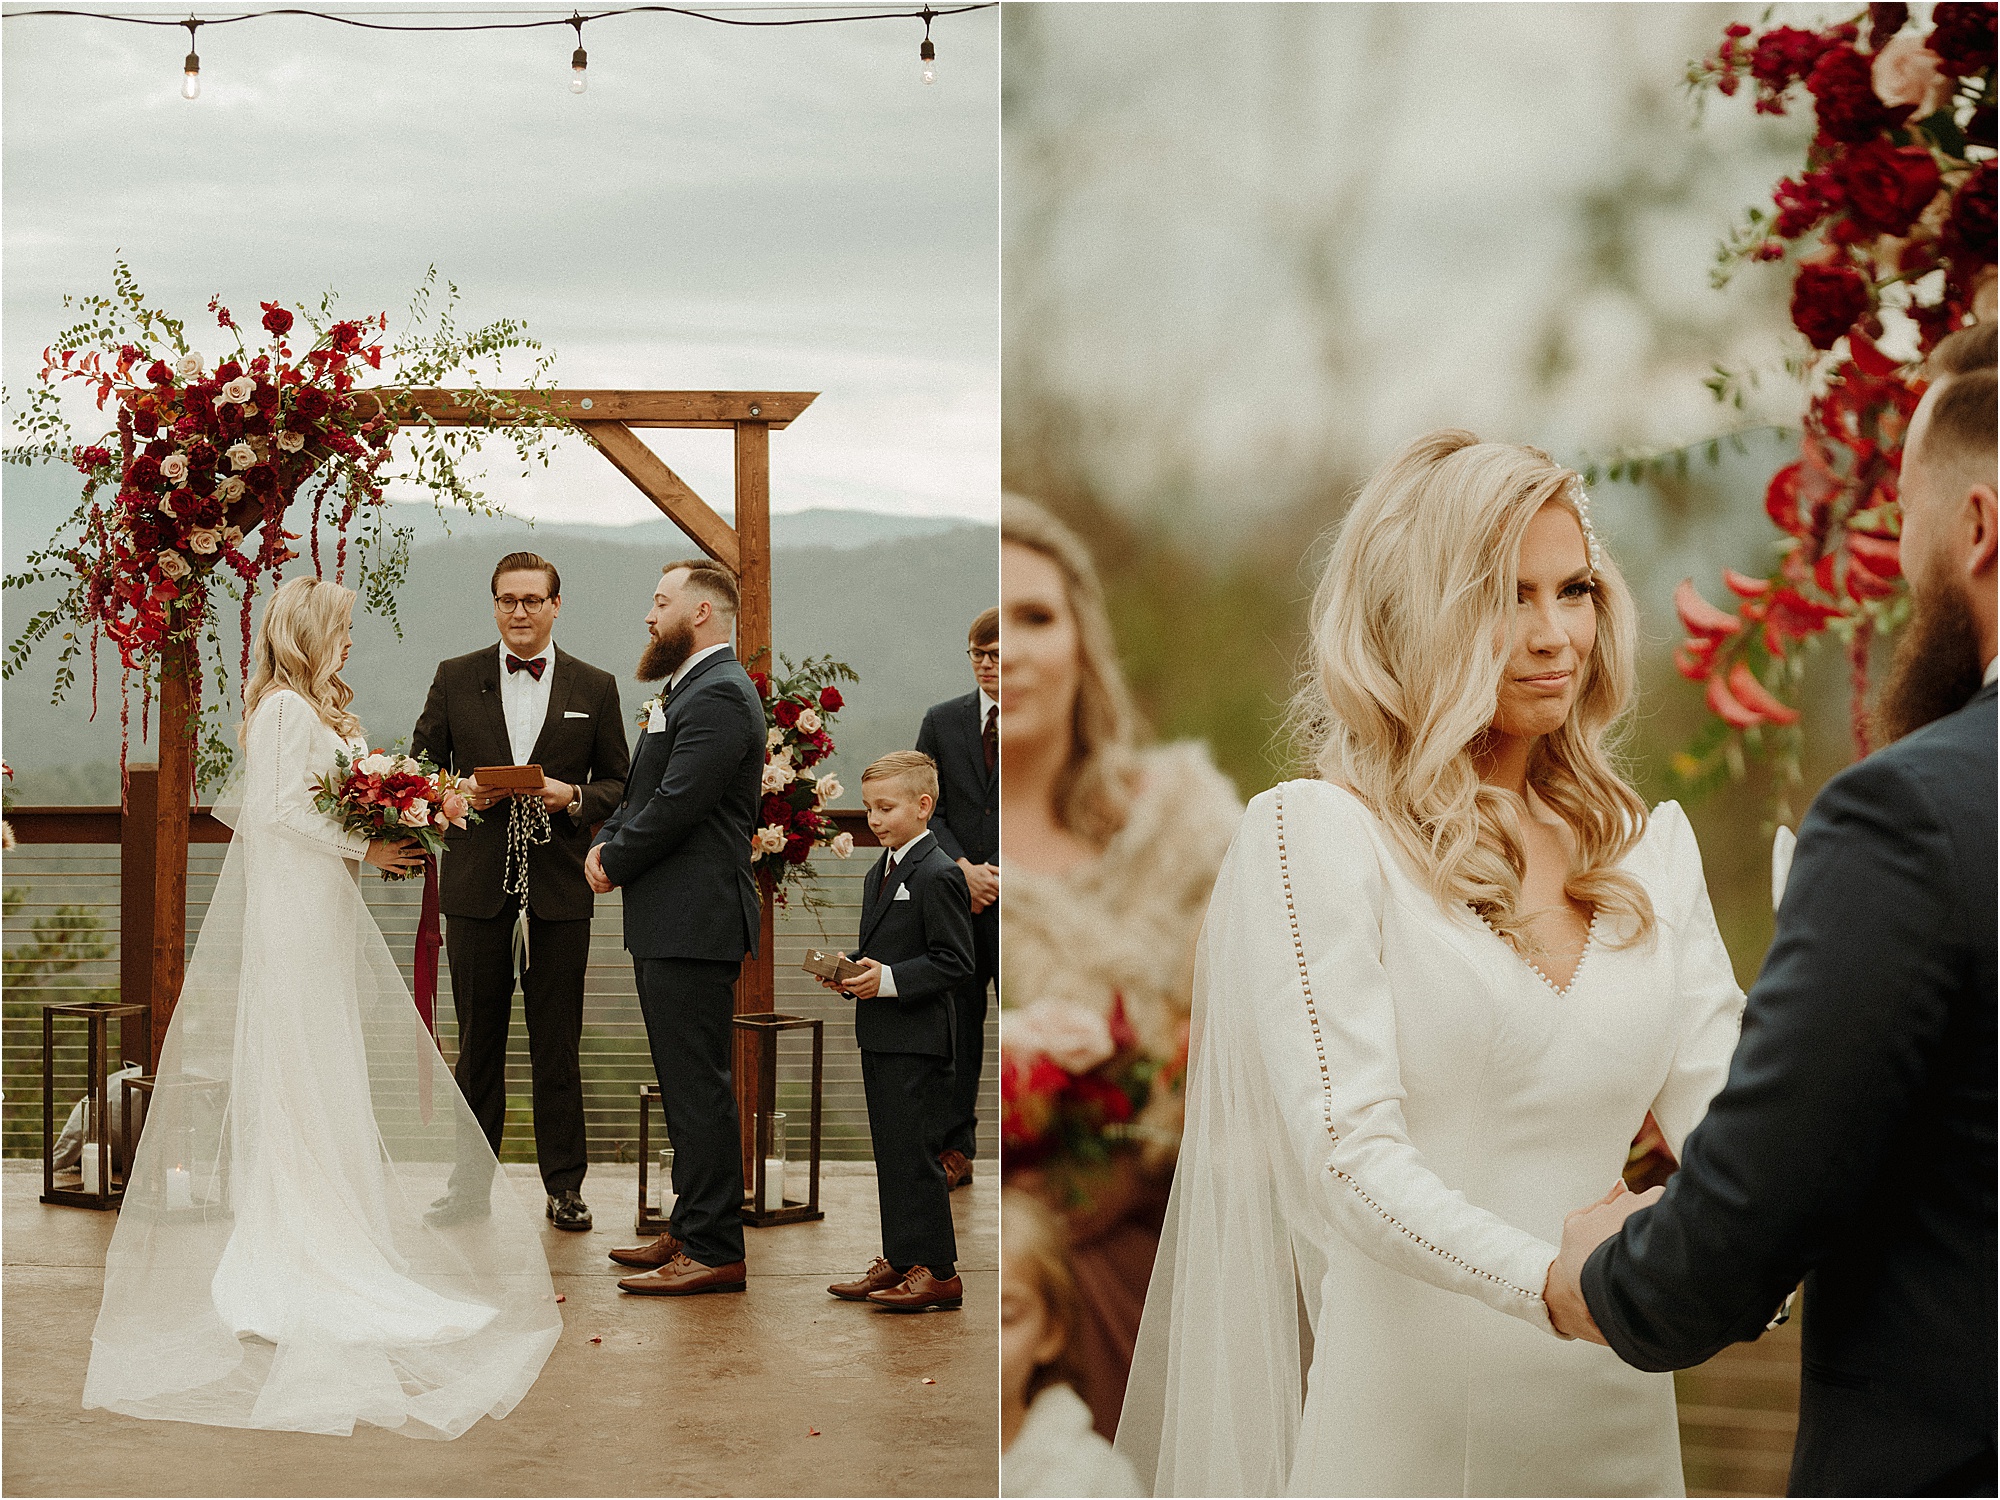 glamorous wedding ceremony at The Magnolia Venue in Pigeon Forge, TN